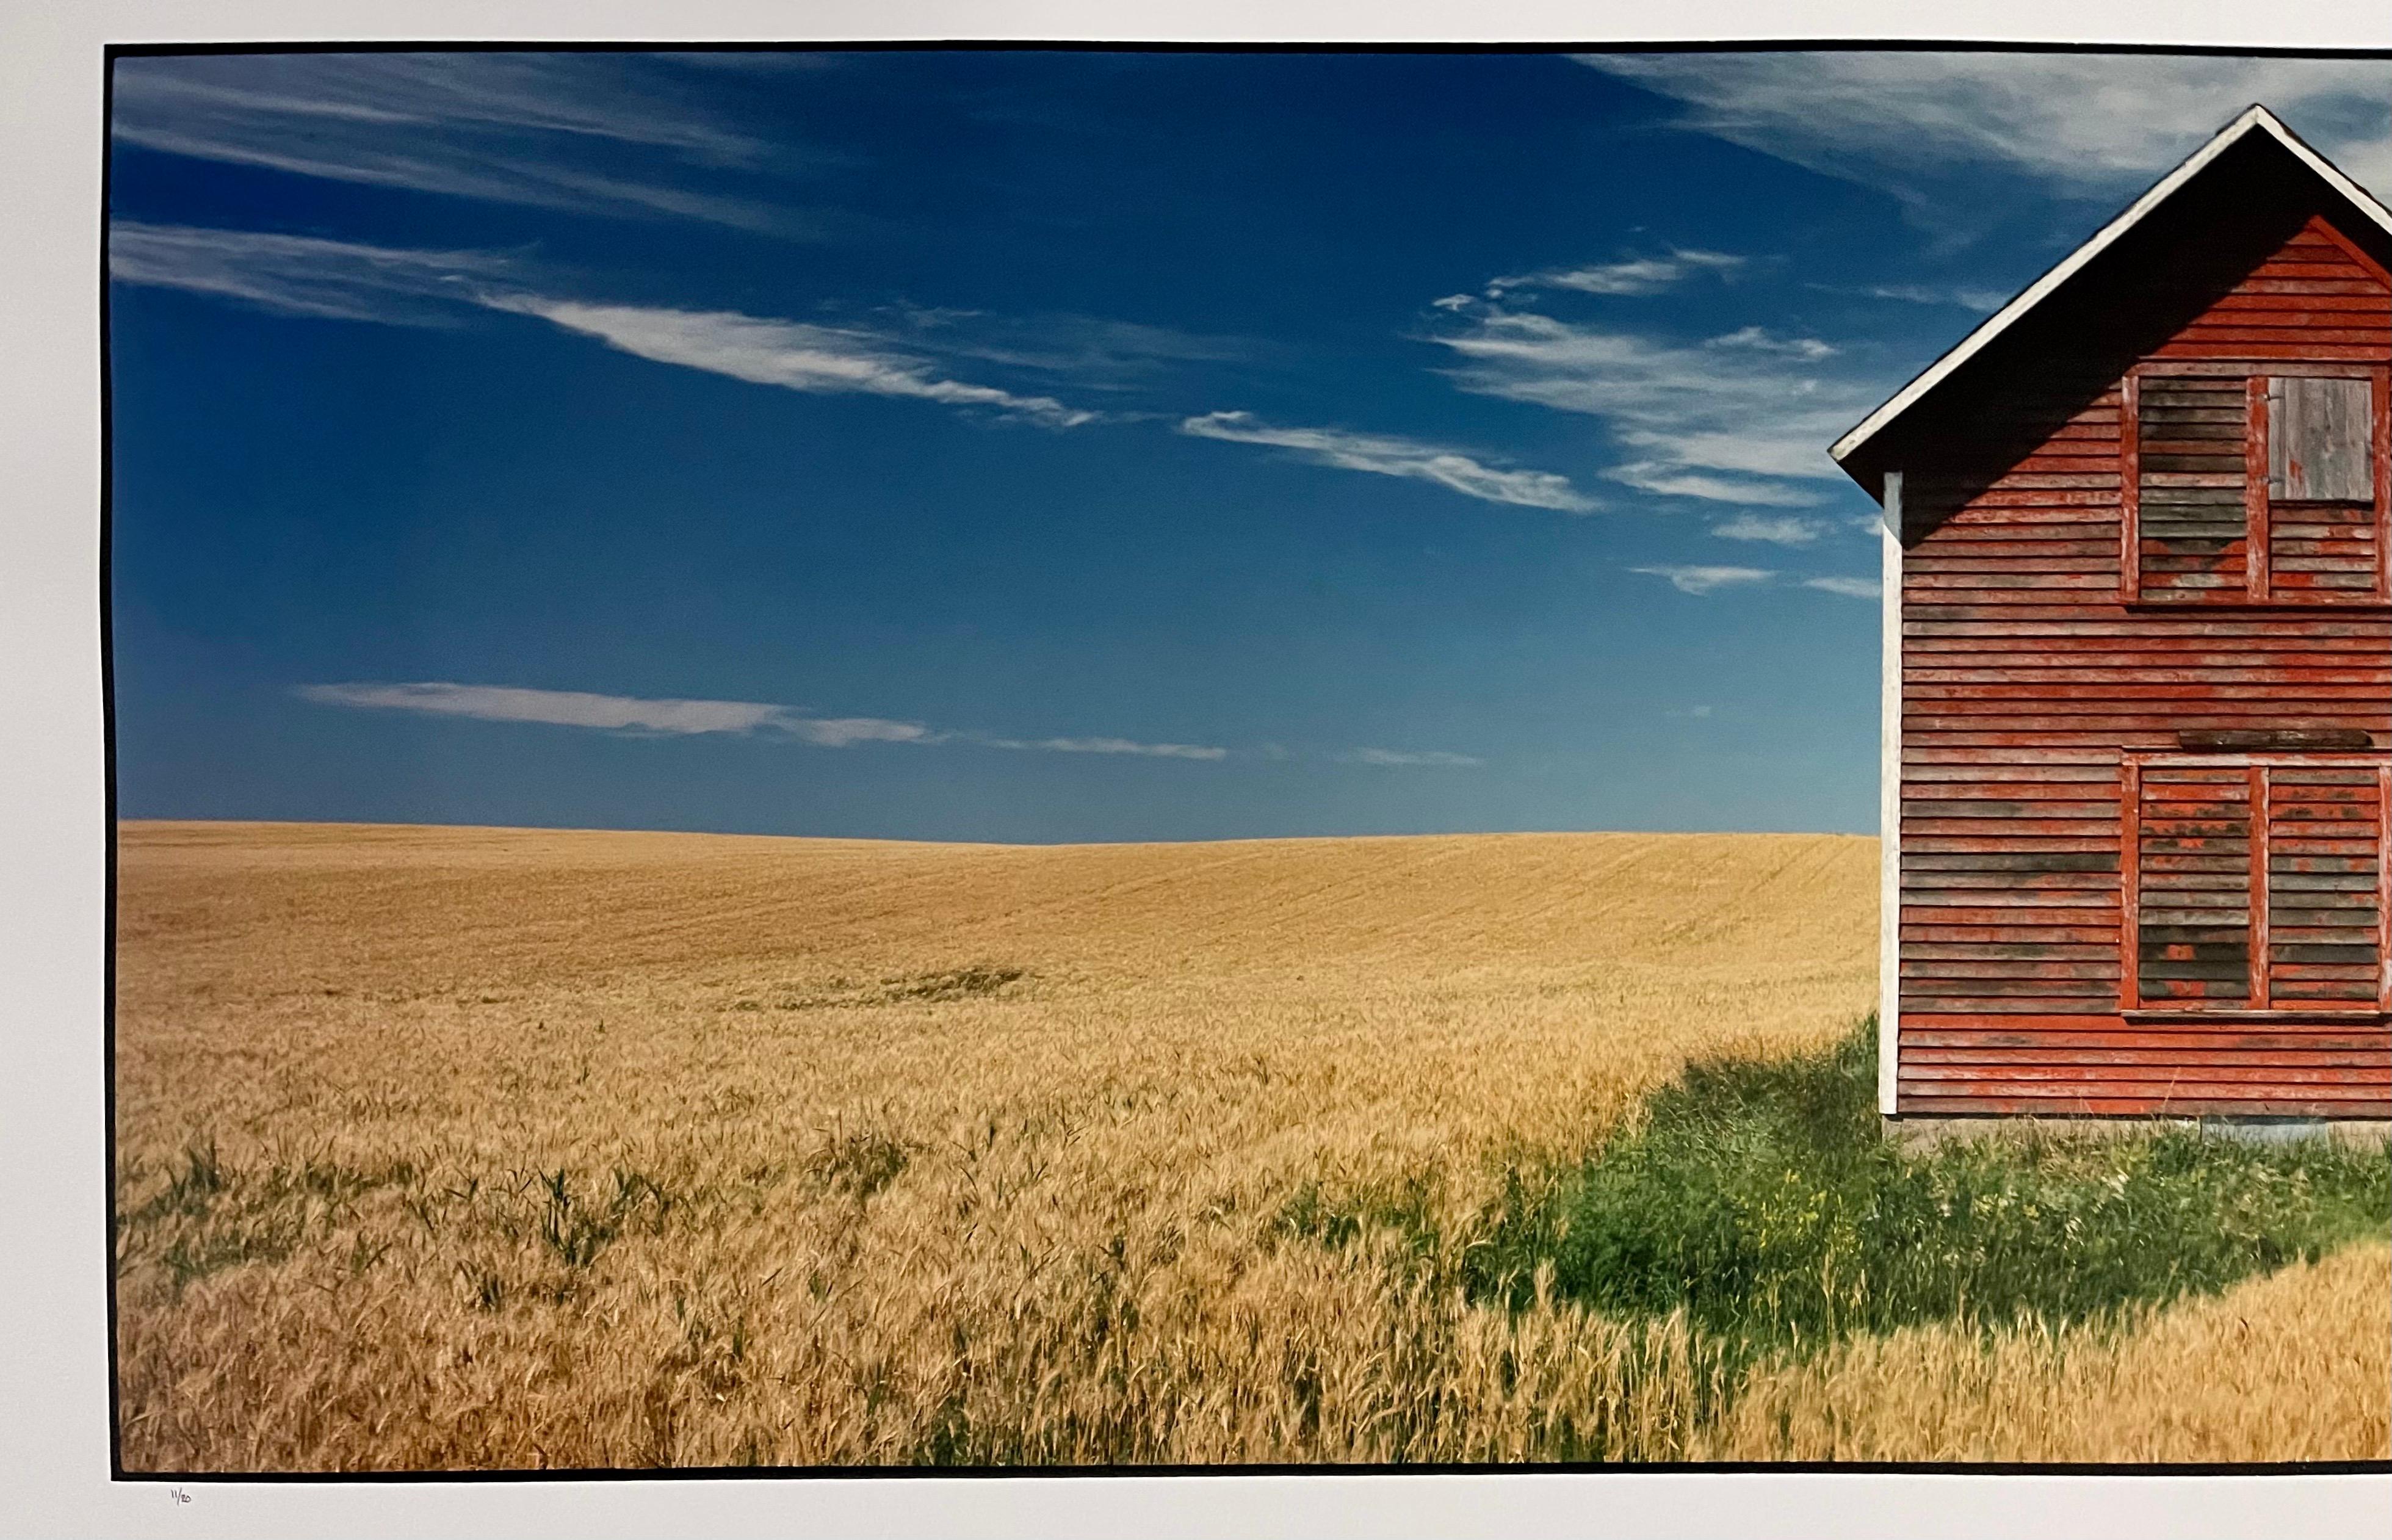 Everts Township Homestead, Summer, 1993
Fabulous American landscape photography of a rural landscape scene. 
from small hand signed edition of 20
Large Format Chromogenic print on Kodak Professional Paper
The sheets are approximately 30 X 56